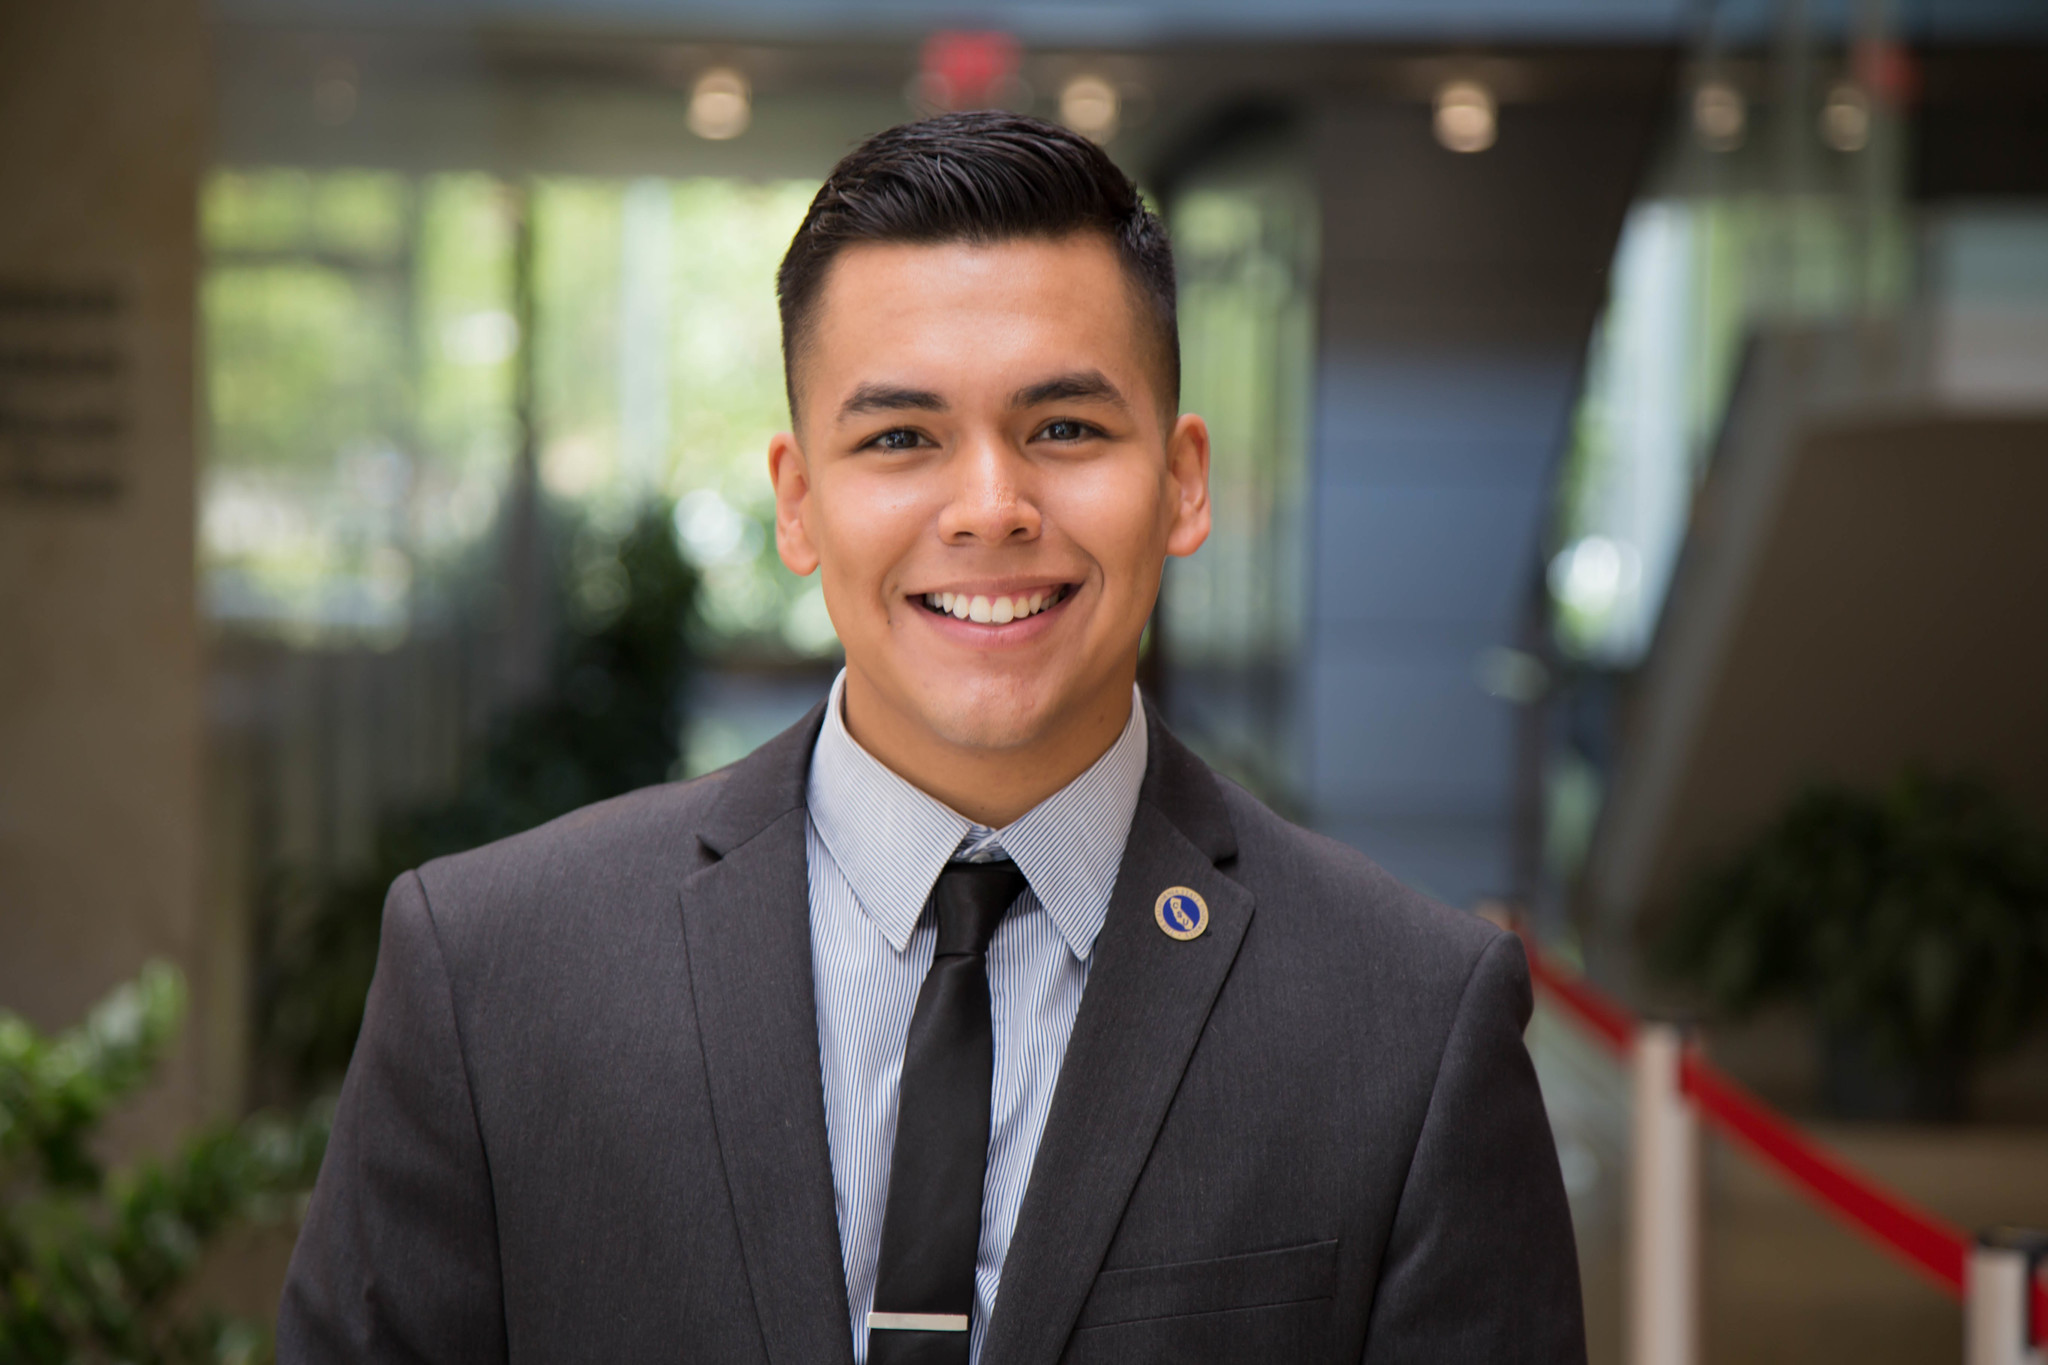 Jorge Reyes Salinas was able to get a campus job at Cal State Northridge thanks to DACA.